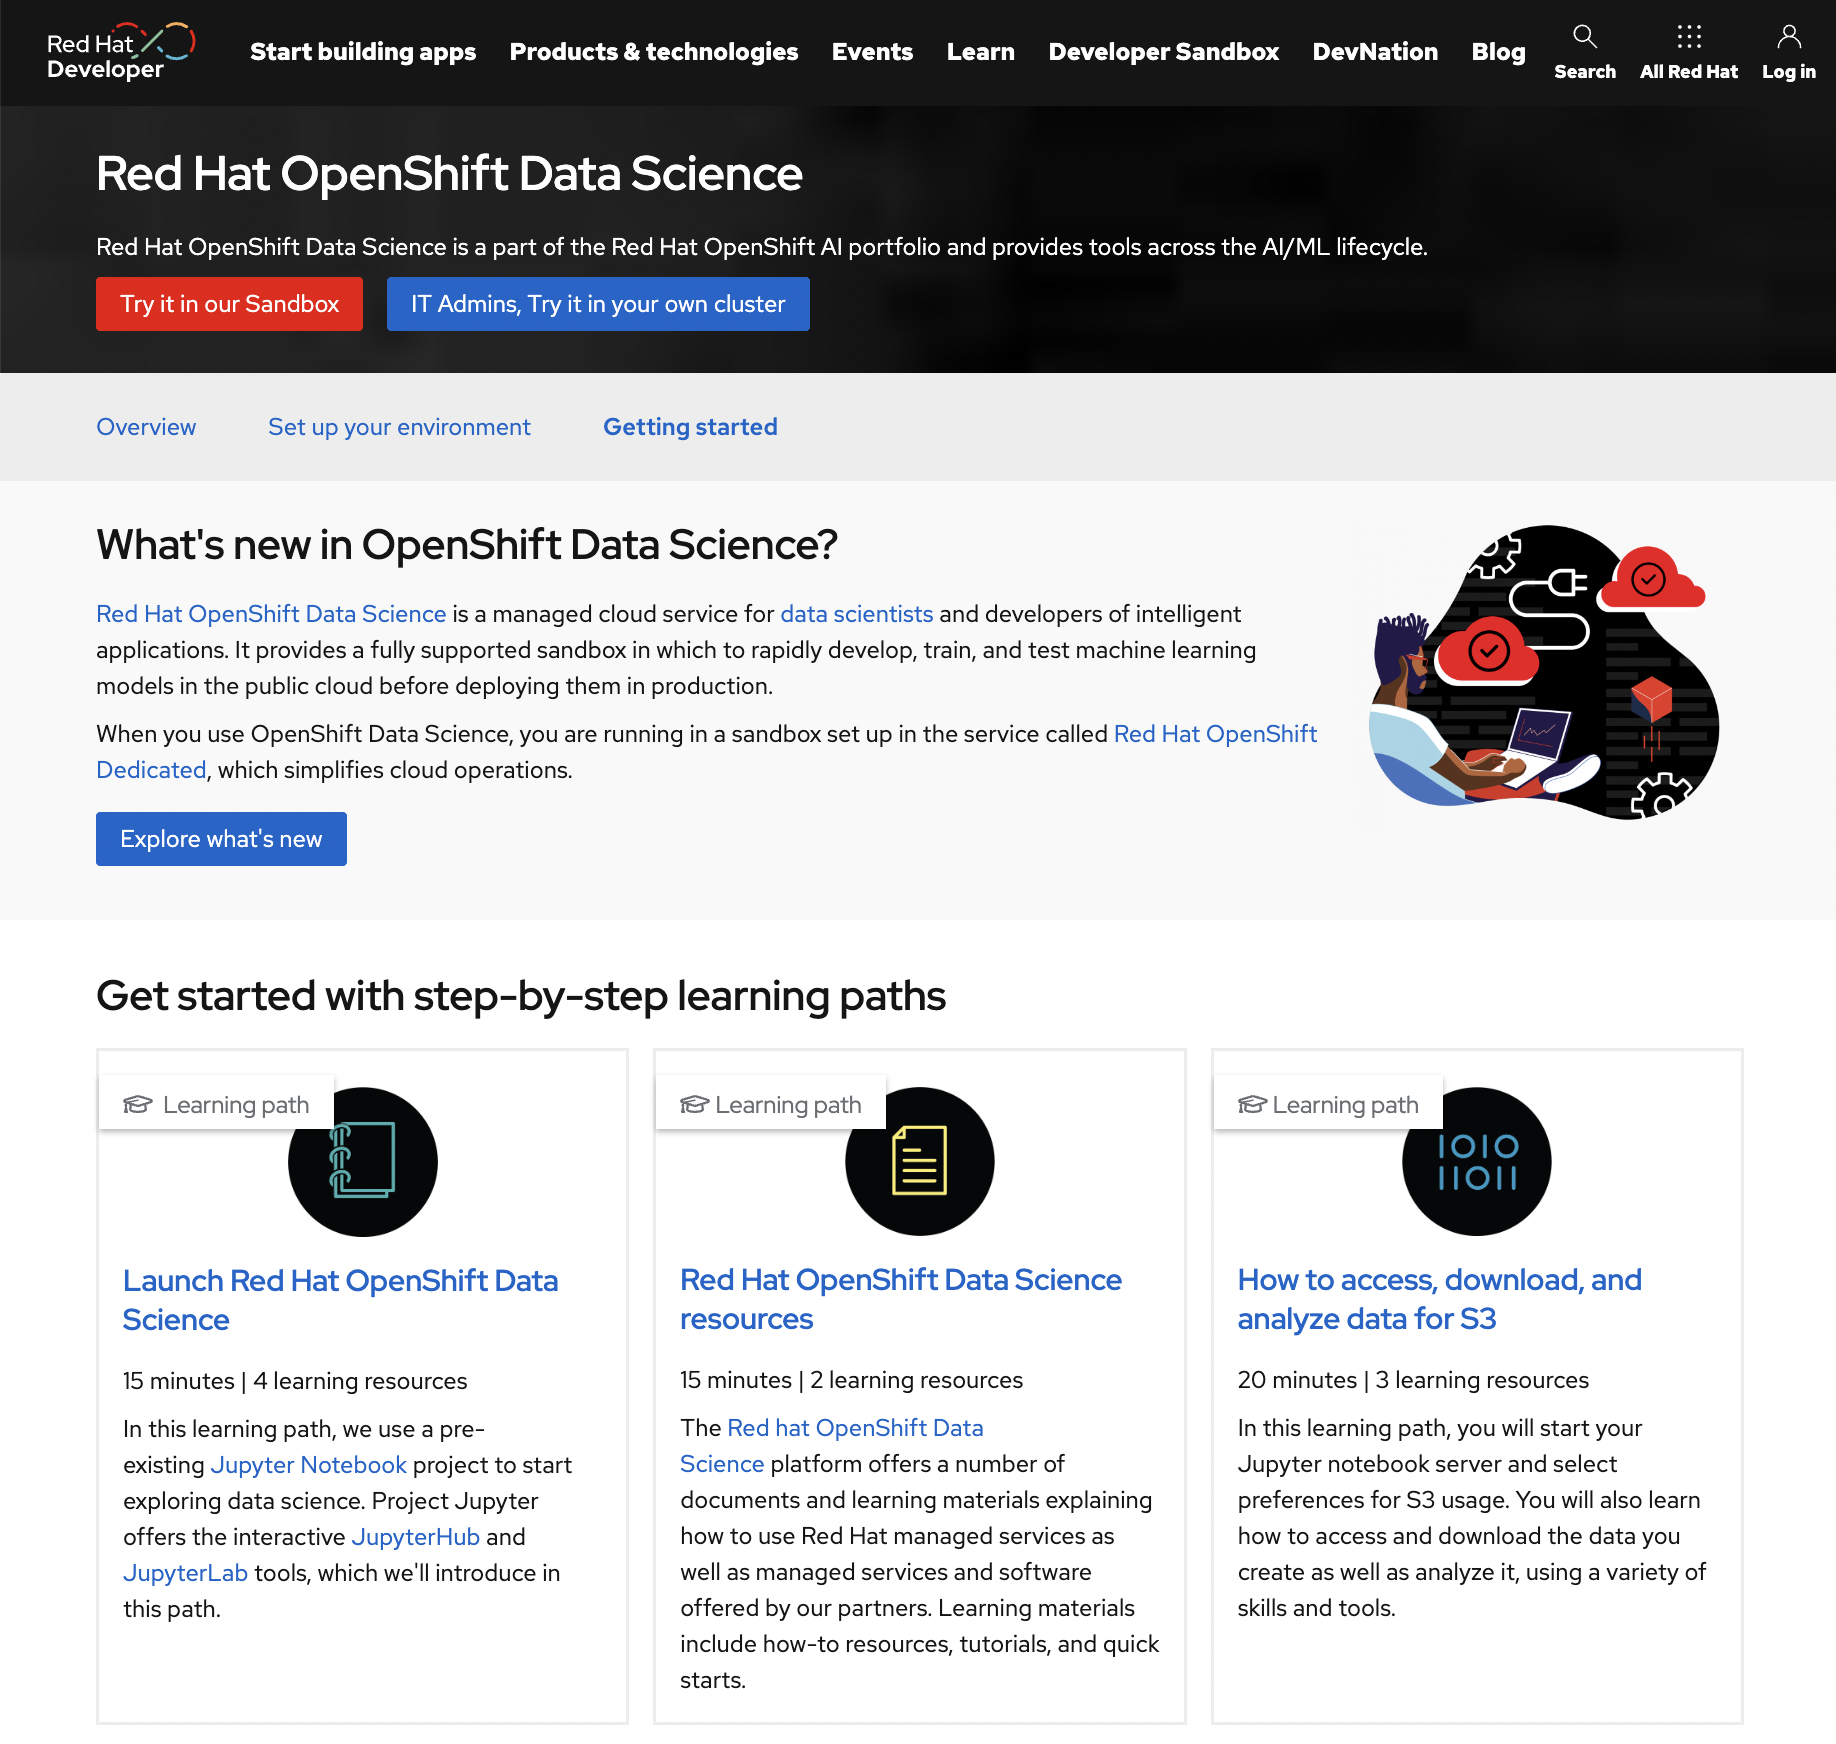 Red Hat OpenShift Data Science